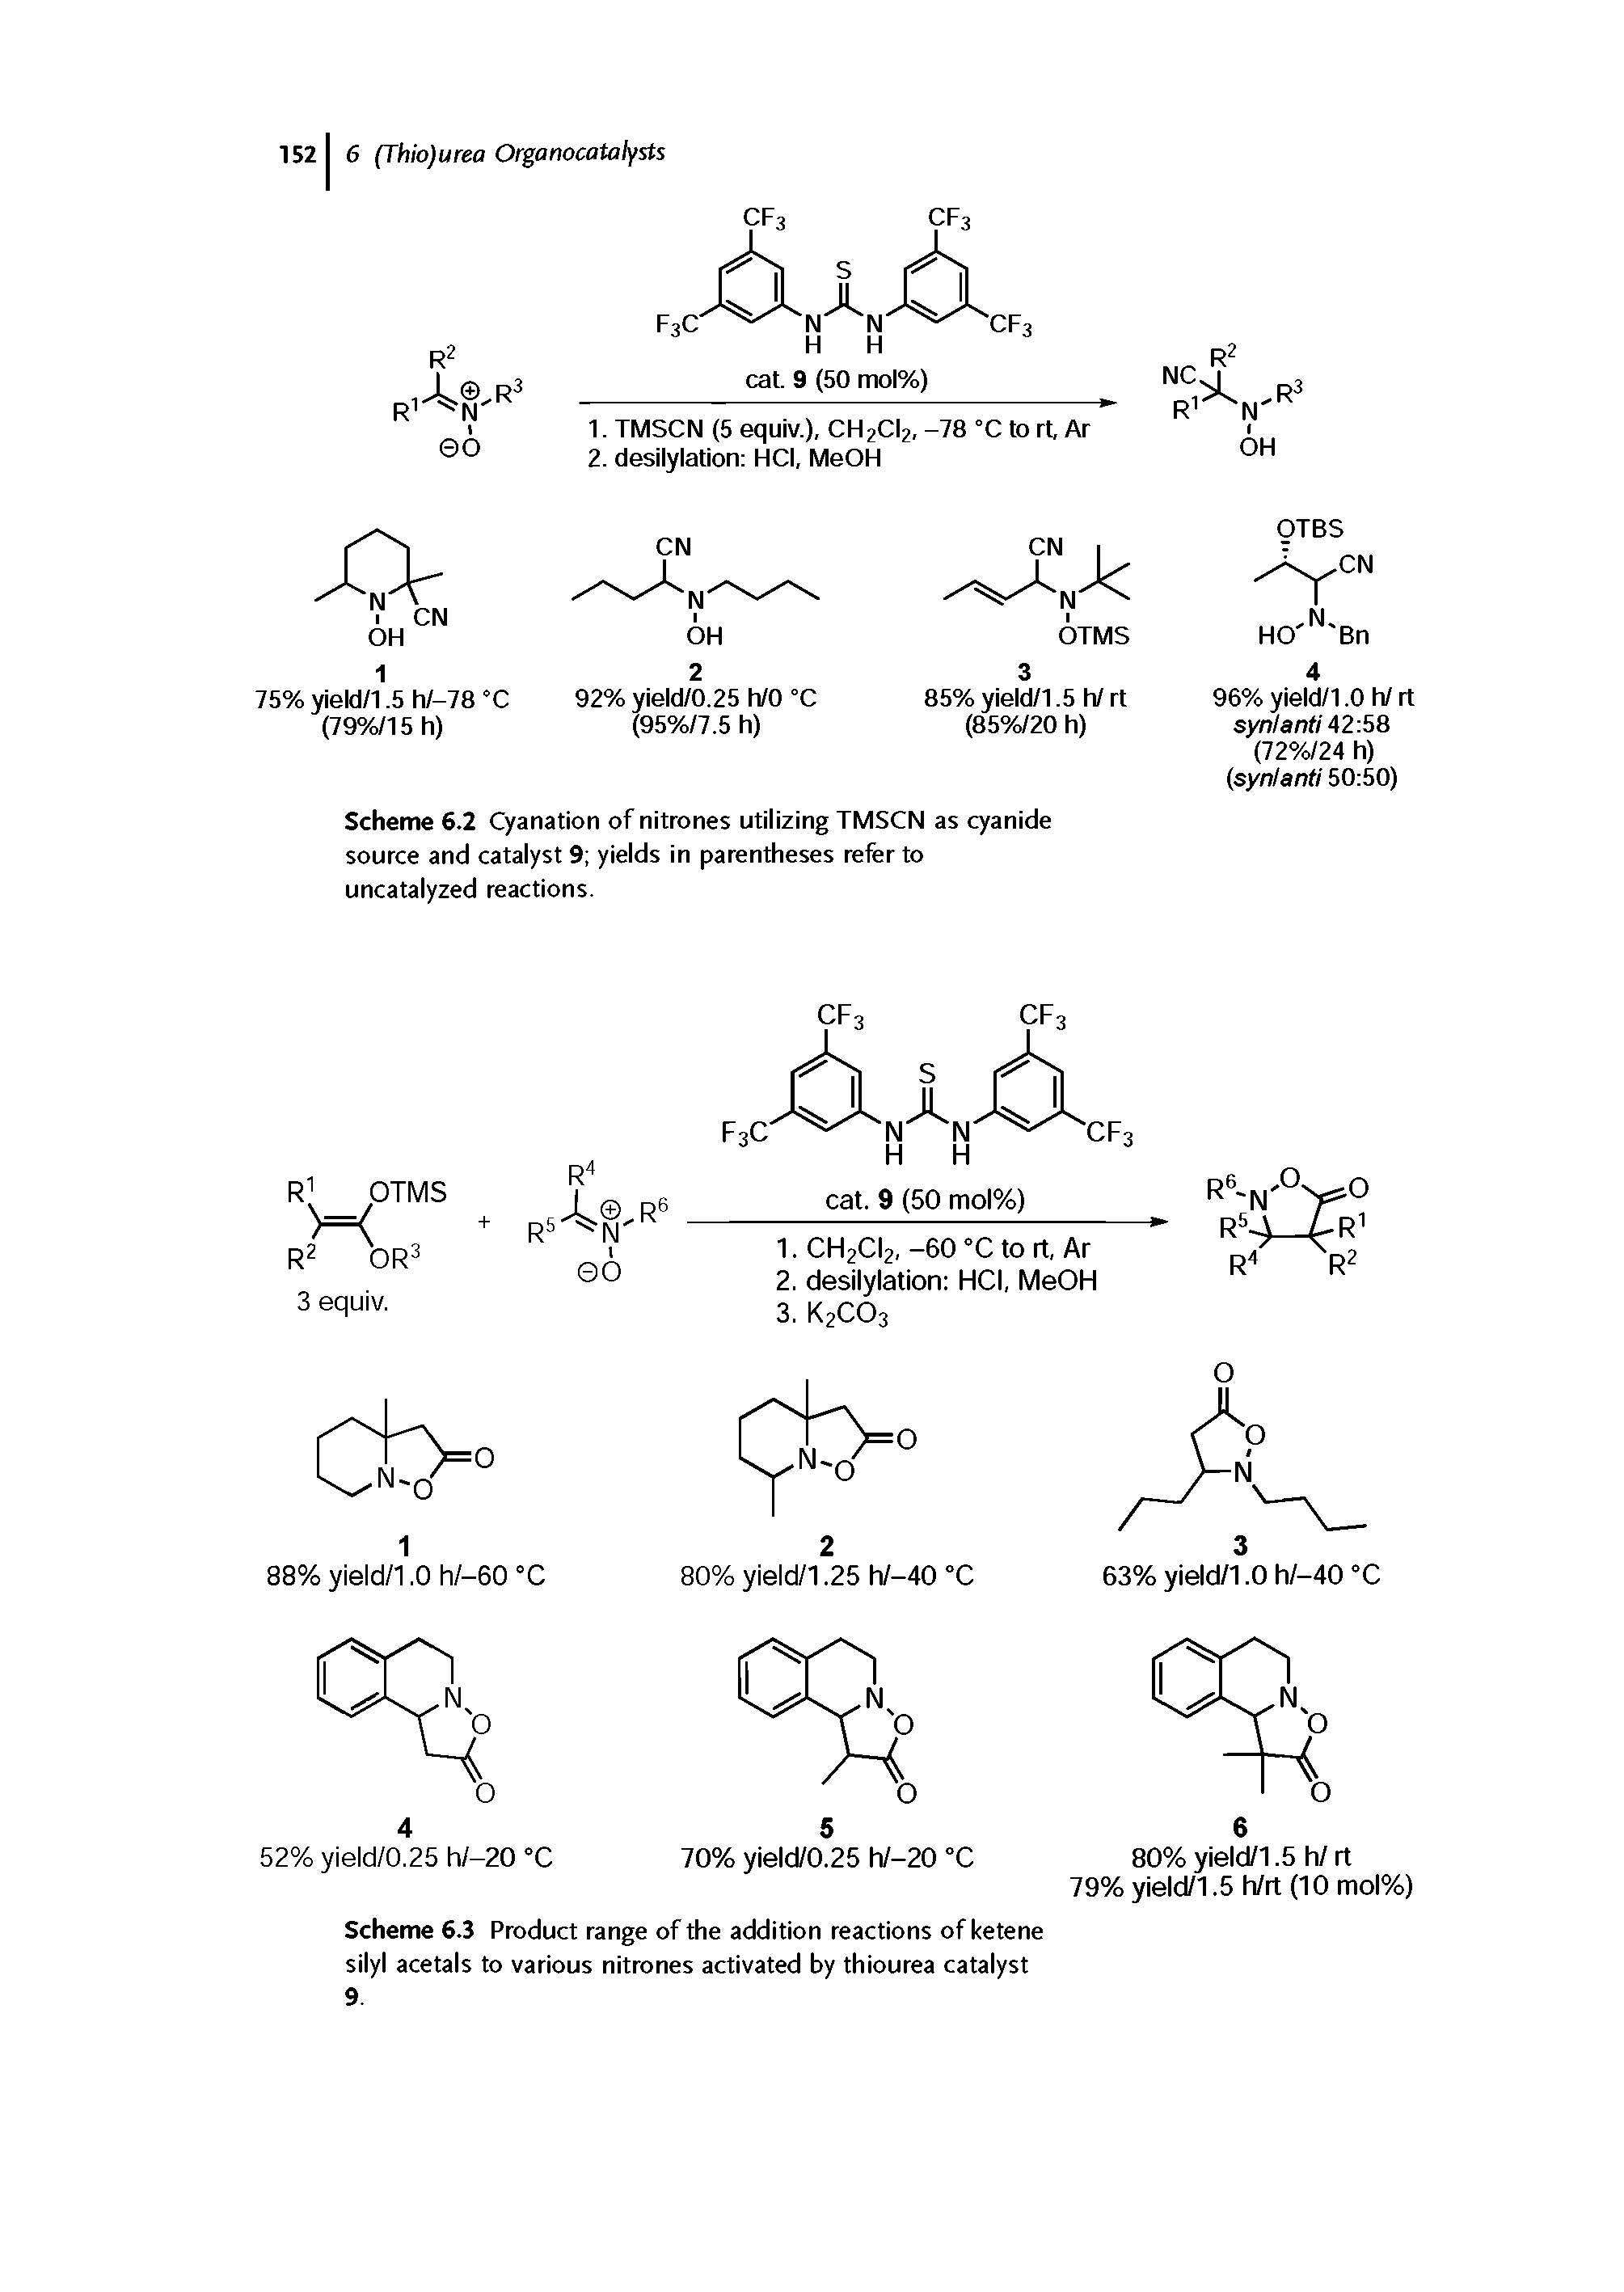 Scheme 6.3 Product range of the addition reactions of ketene silyl acetals to various nitrones activated by thiourea catalyst...